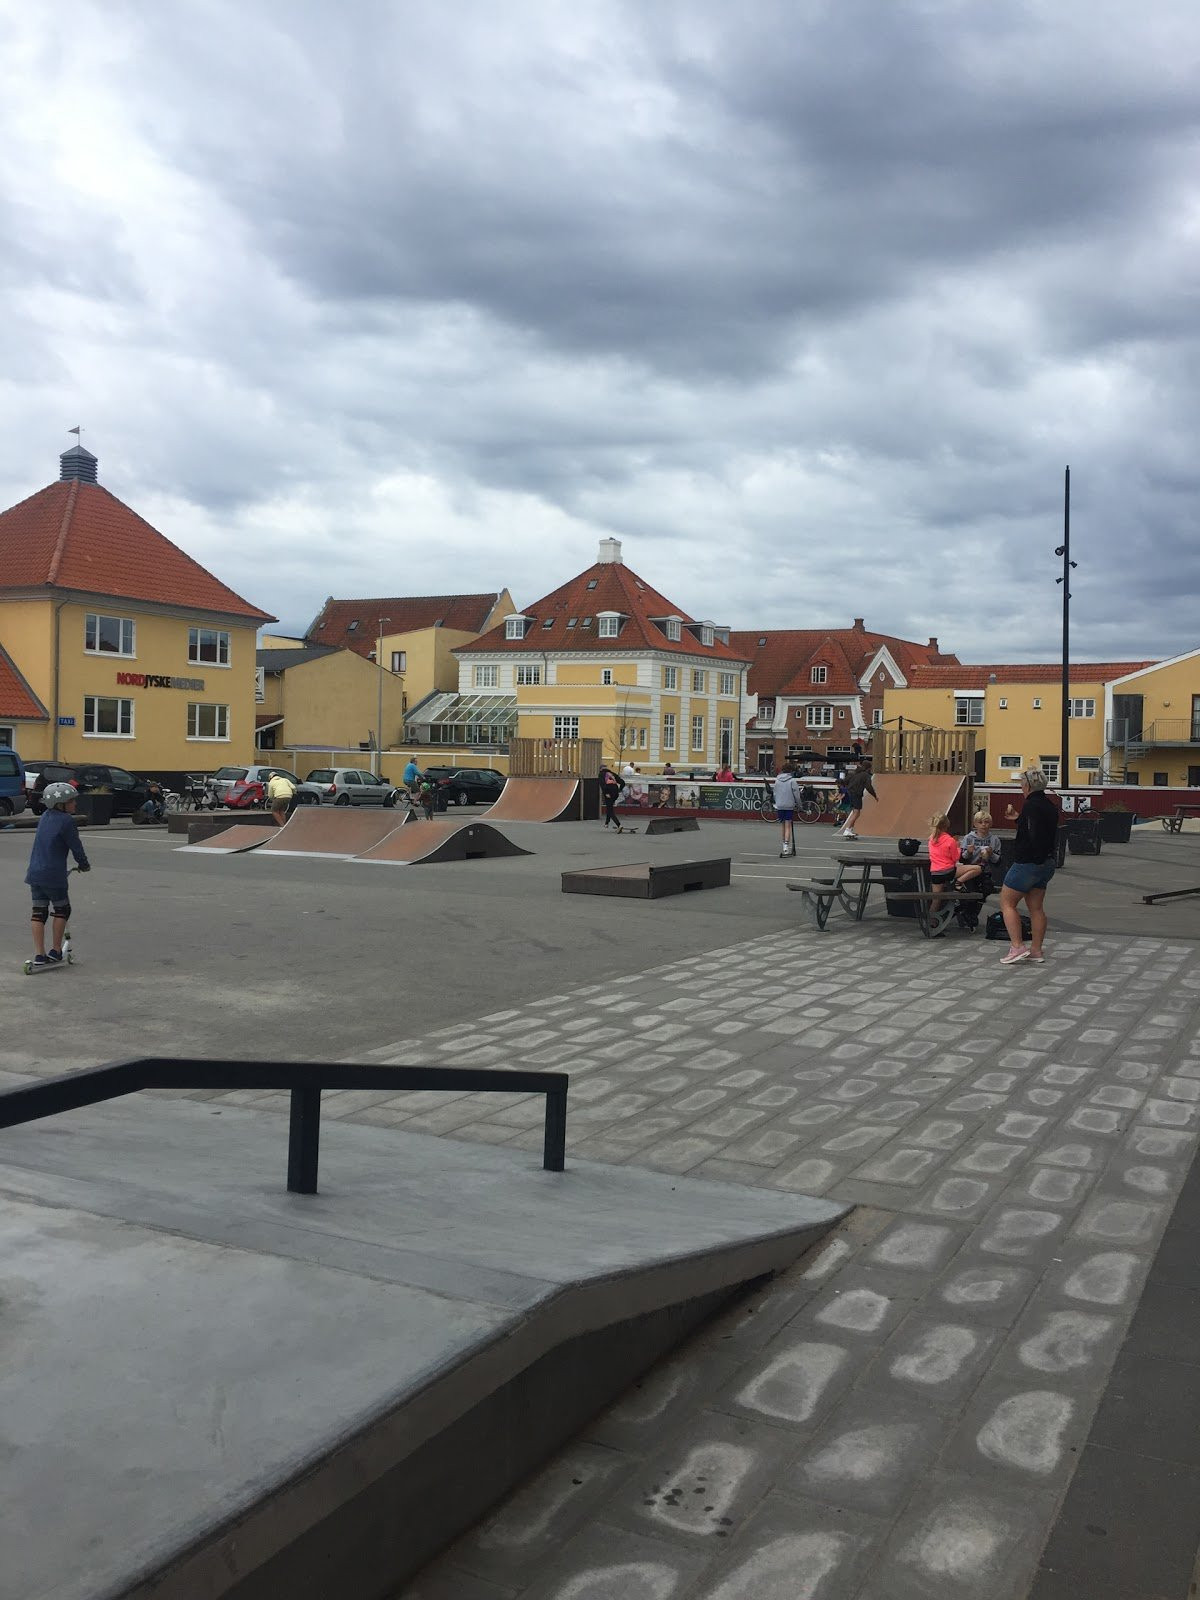 There are big plans to expand Skagen skatepark. The locals talks of new ramps and elements made of concrete. What will actually happen is still uncertain.The municipality are in charge of construction and they have not yet contacted the local people who use the skatepark. At present, the park consists of wooden obstacles. There is a manual pad, a wooden speed bump, fly-outs, ledges, stair sets and a mini concrete bank.The project is interesting as the park is already a small but nice skatepark.If you have any information about Skagen Skatepark, we would love to hear from you. You can contact us by sending an email to: info@skatein.com